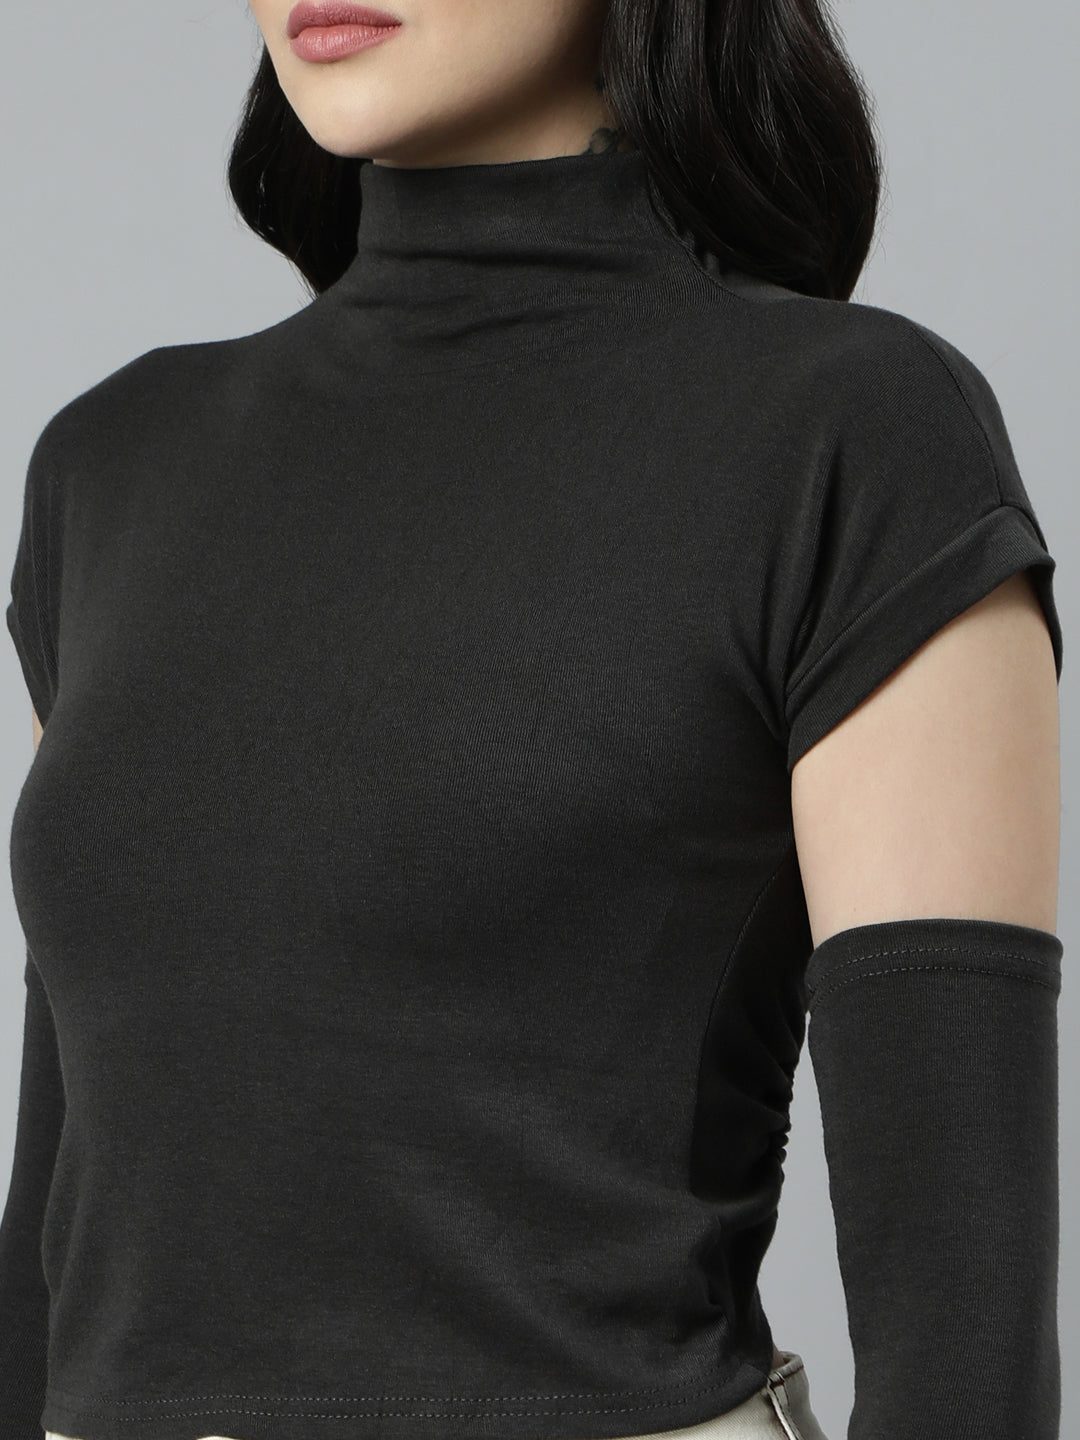 Women Solid Grey Styled Back Top comes with Detachable Sleeves